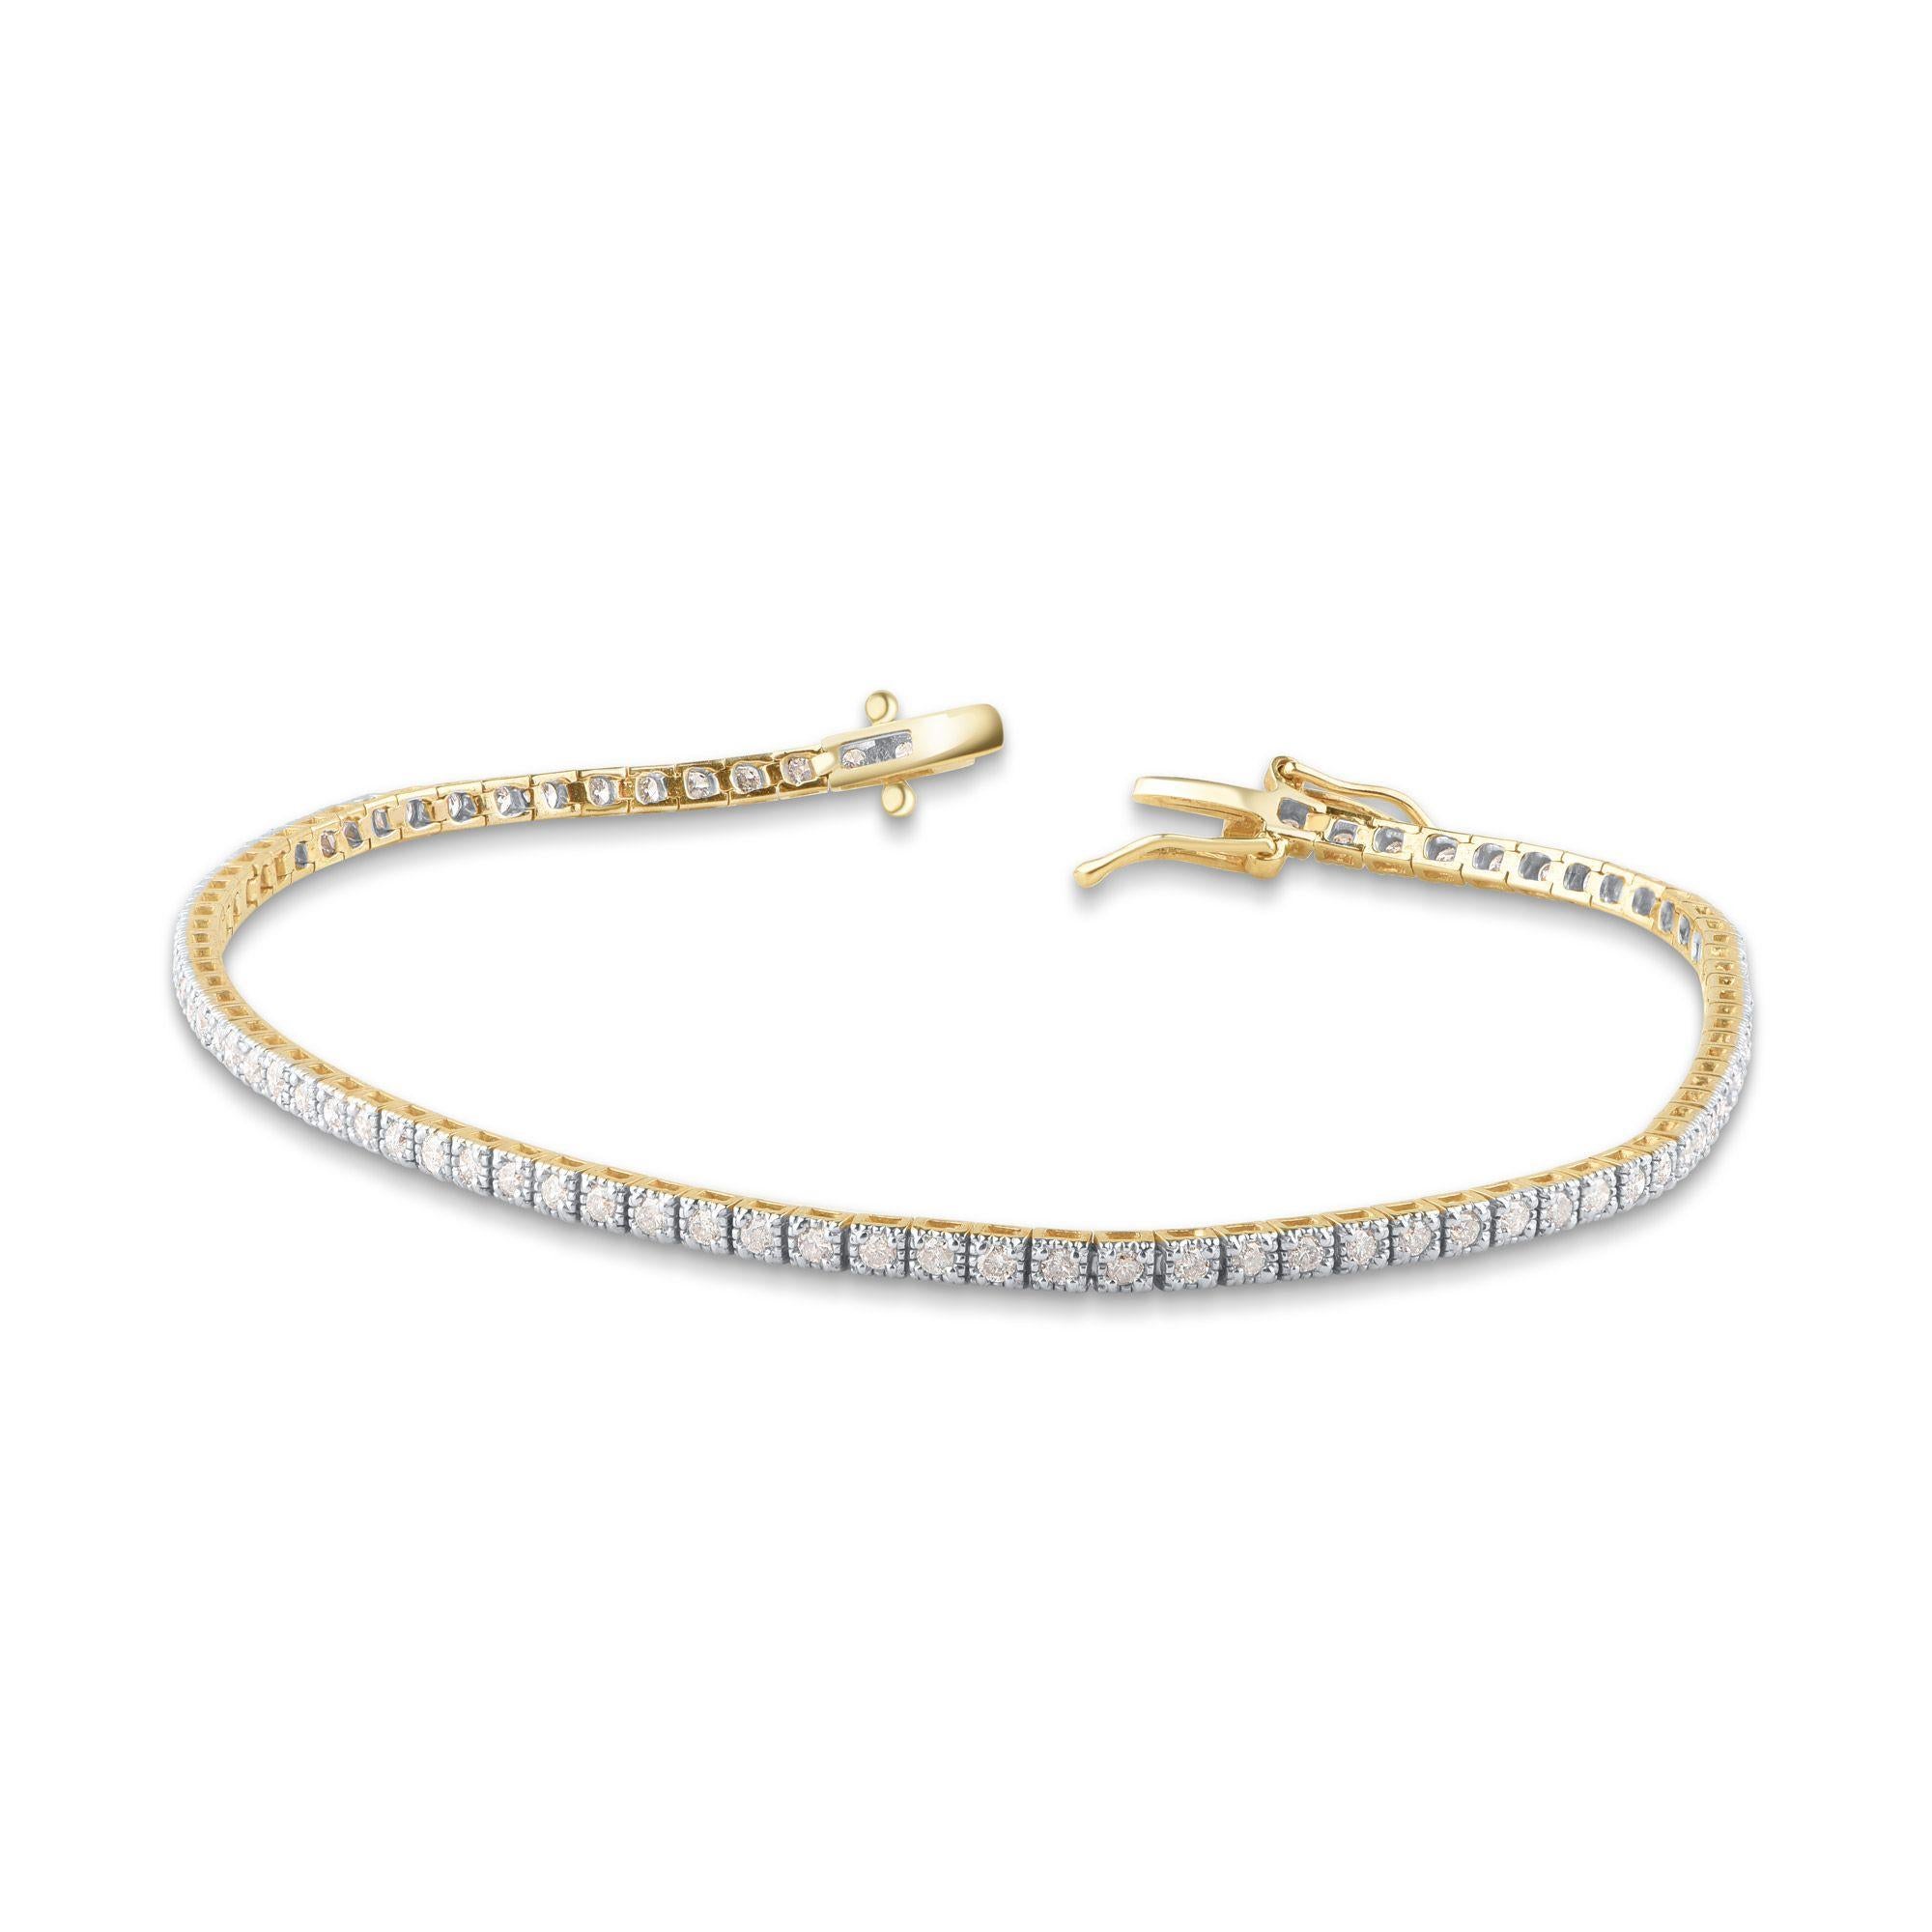 Adorn your wrist with the stunning Tennis Bracelet, studded with 86 diamonds in pave setting. Polished and Created in 10 karat yellow gold. Diamonds are graded I-J Color, I2-I3 Clarity. 
